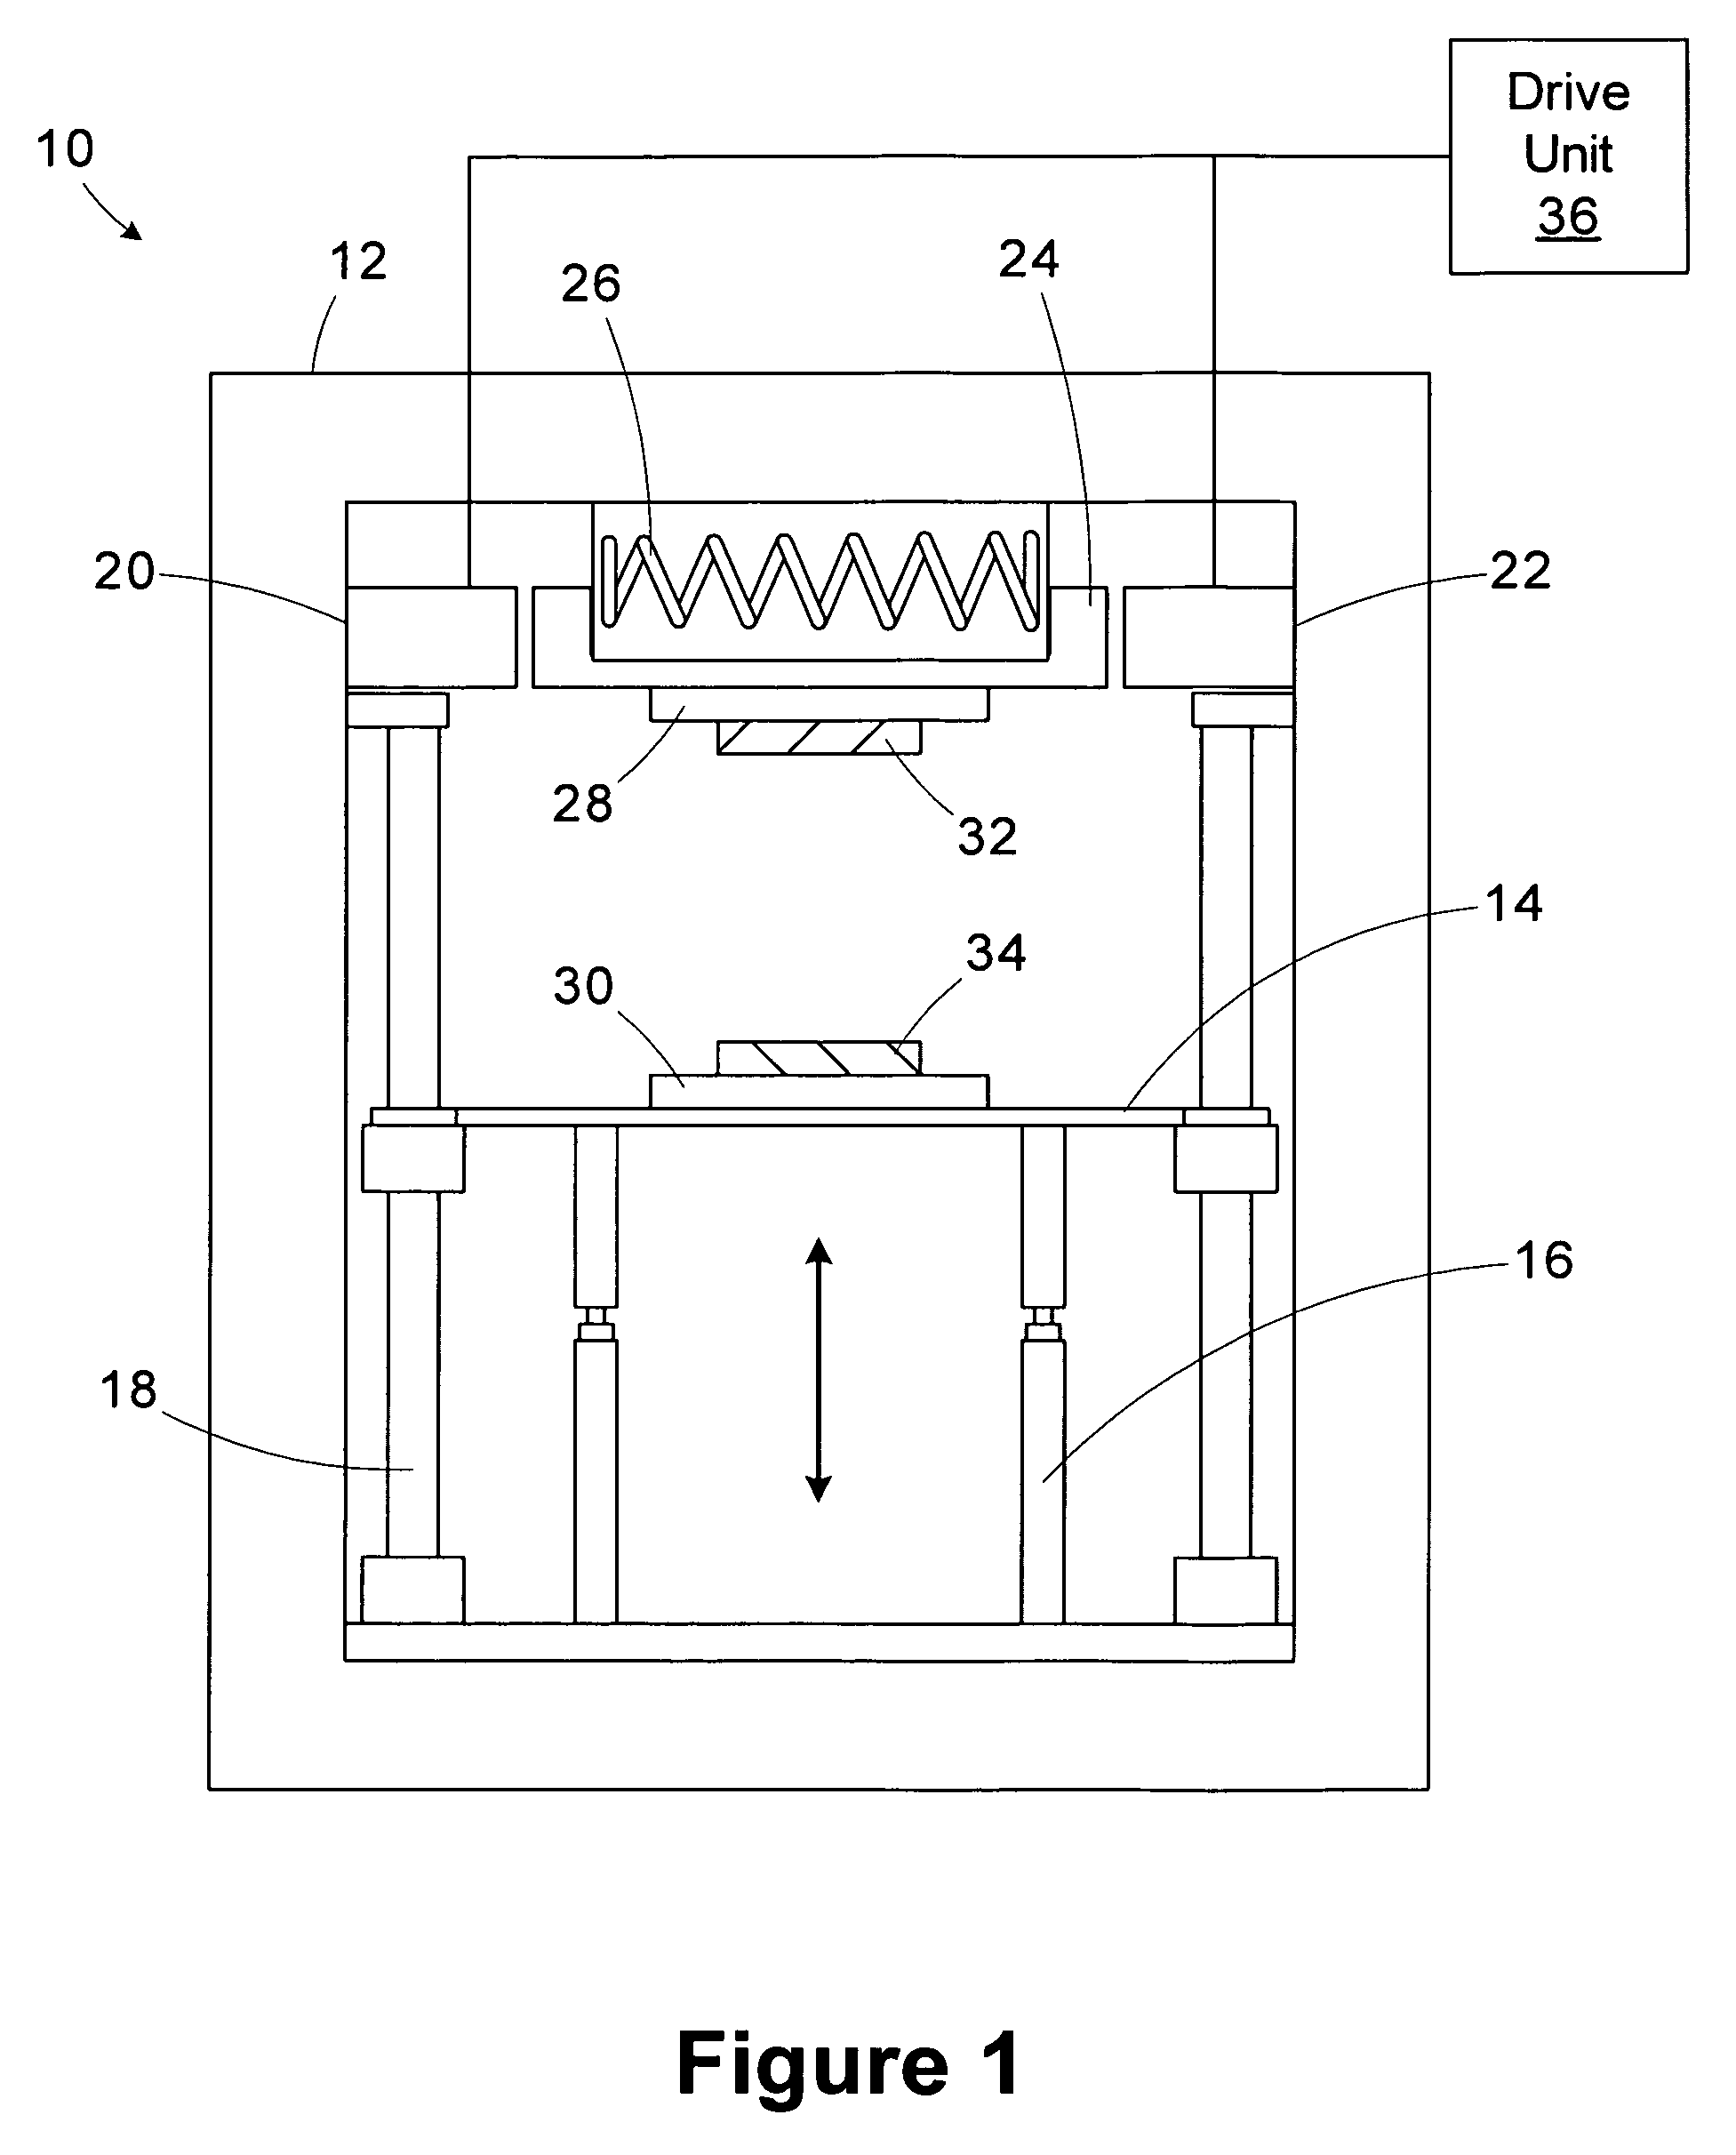 Drive unit for controlling reciprocating electromagnets